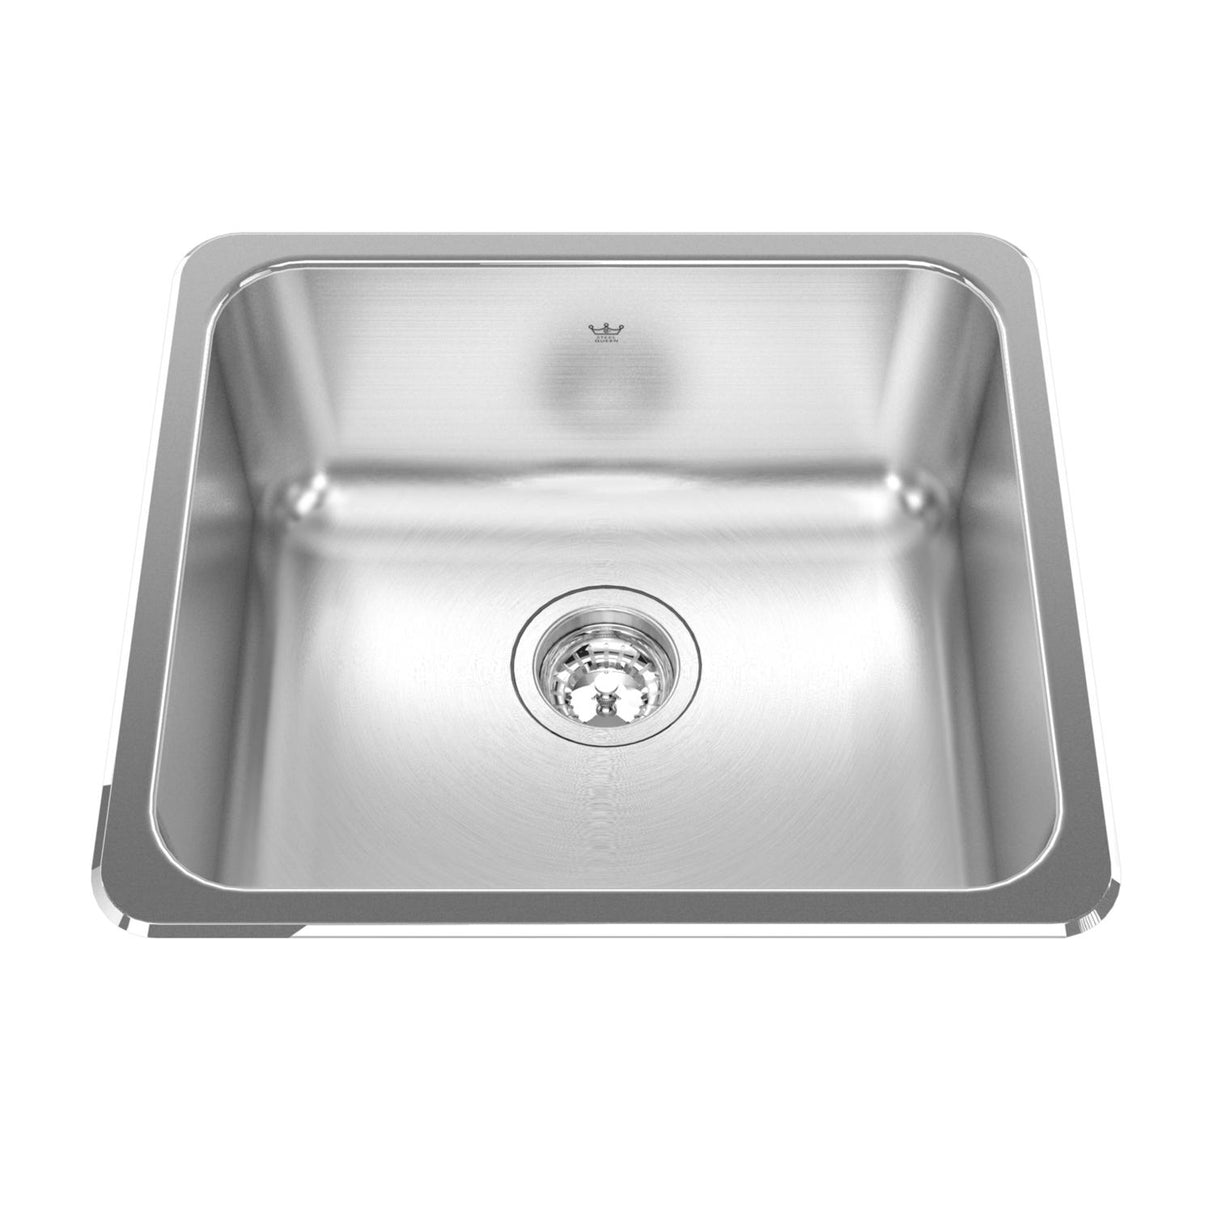 KINDRED QSA1820-8N Steel Queen 20.13-in LR x 18.13-in FB x 8-in DP Drop In Single Bowl Stainless Steel Kitchen Sink In Satin Finished Bowl with Mirror Finished Rim